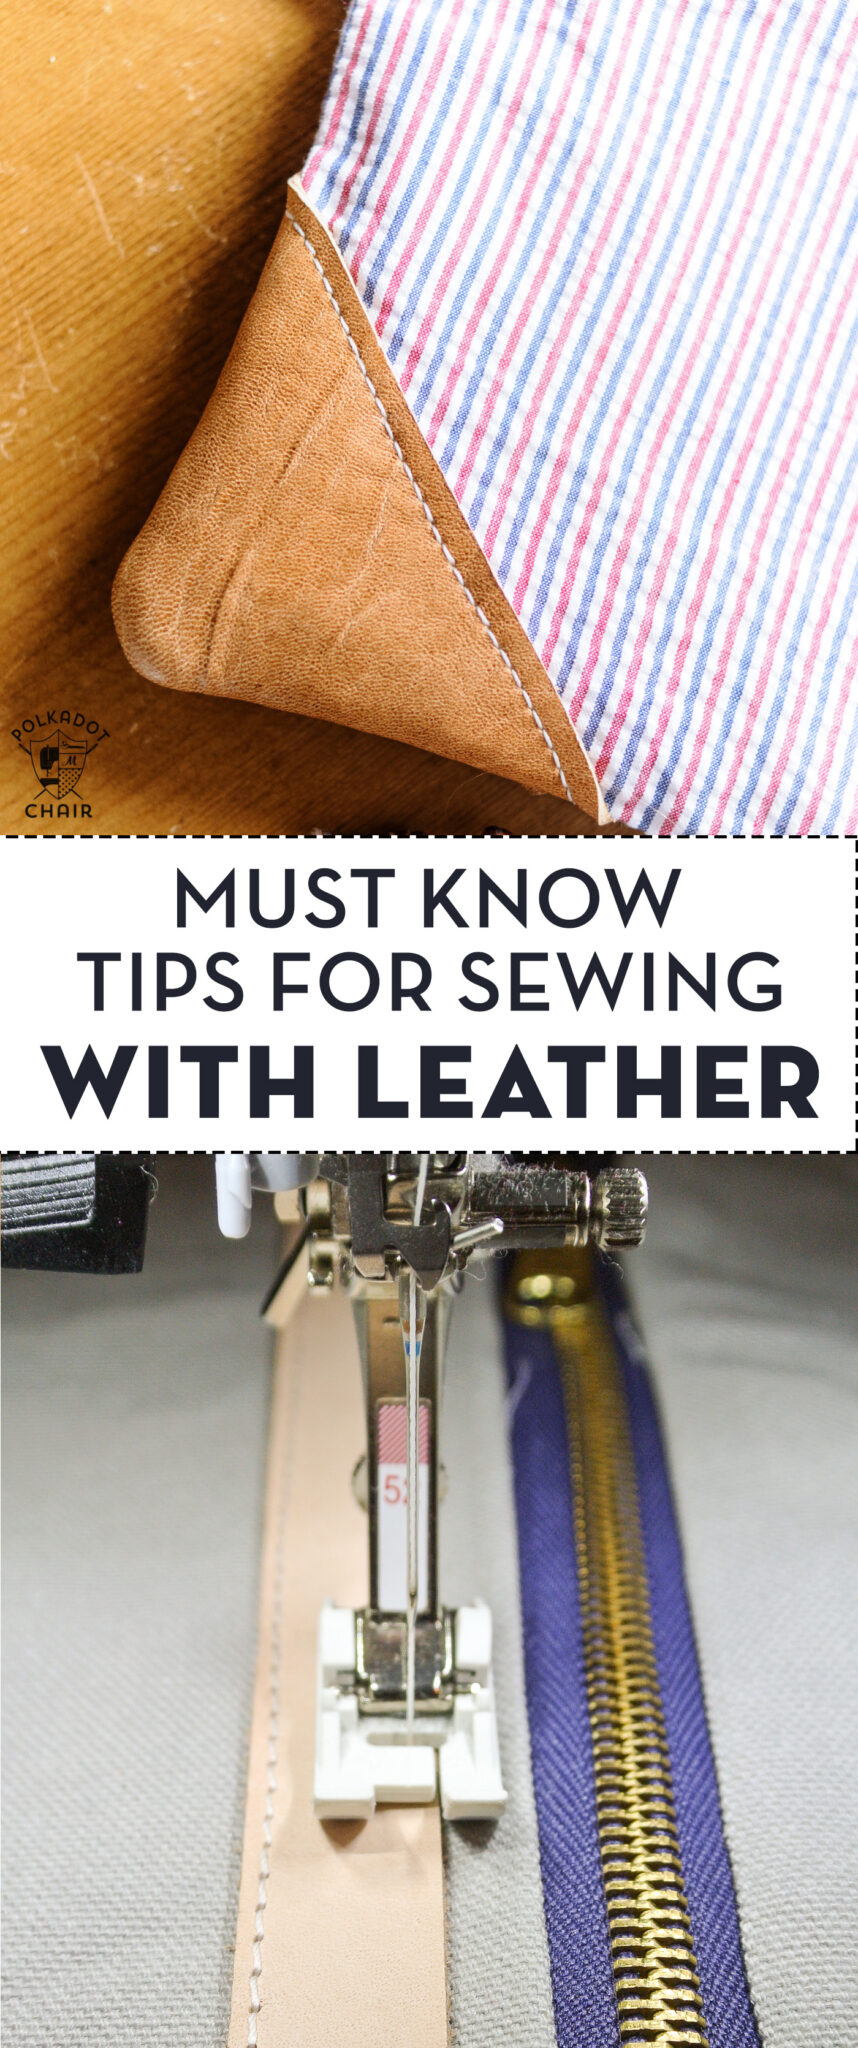 Tips for Sewing with Leather on a Home Machine | Polka Dot Chair